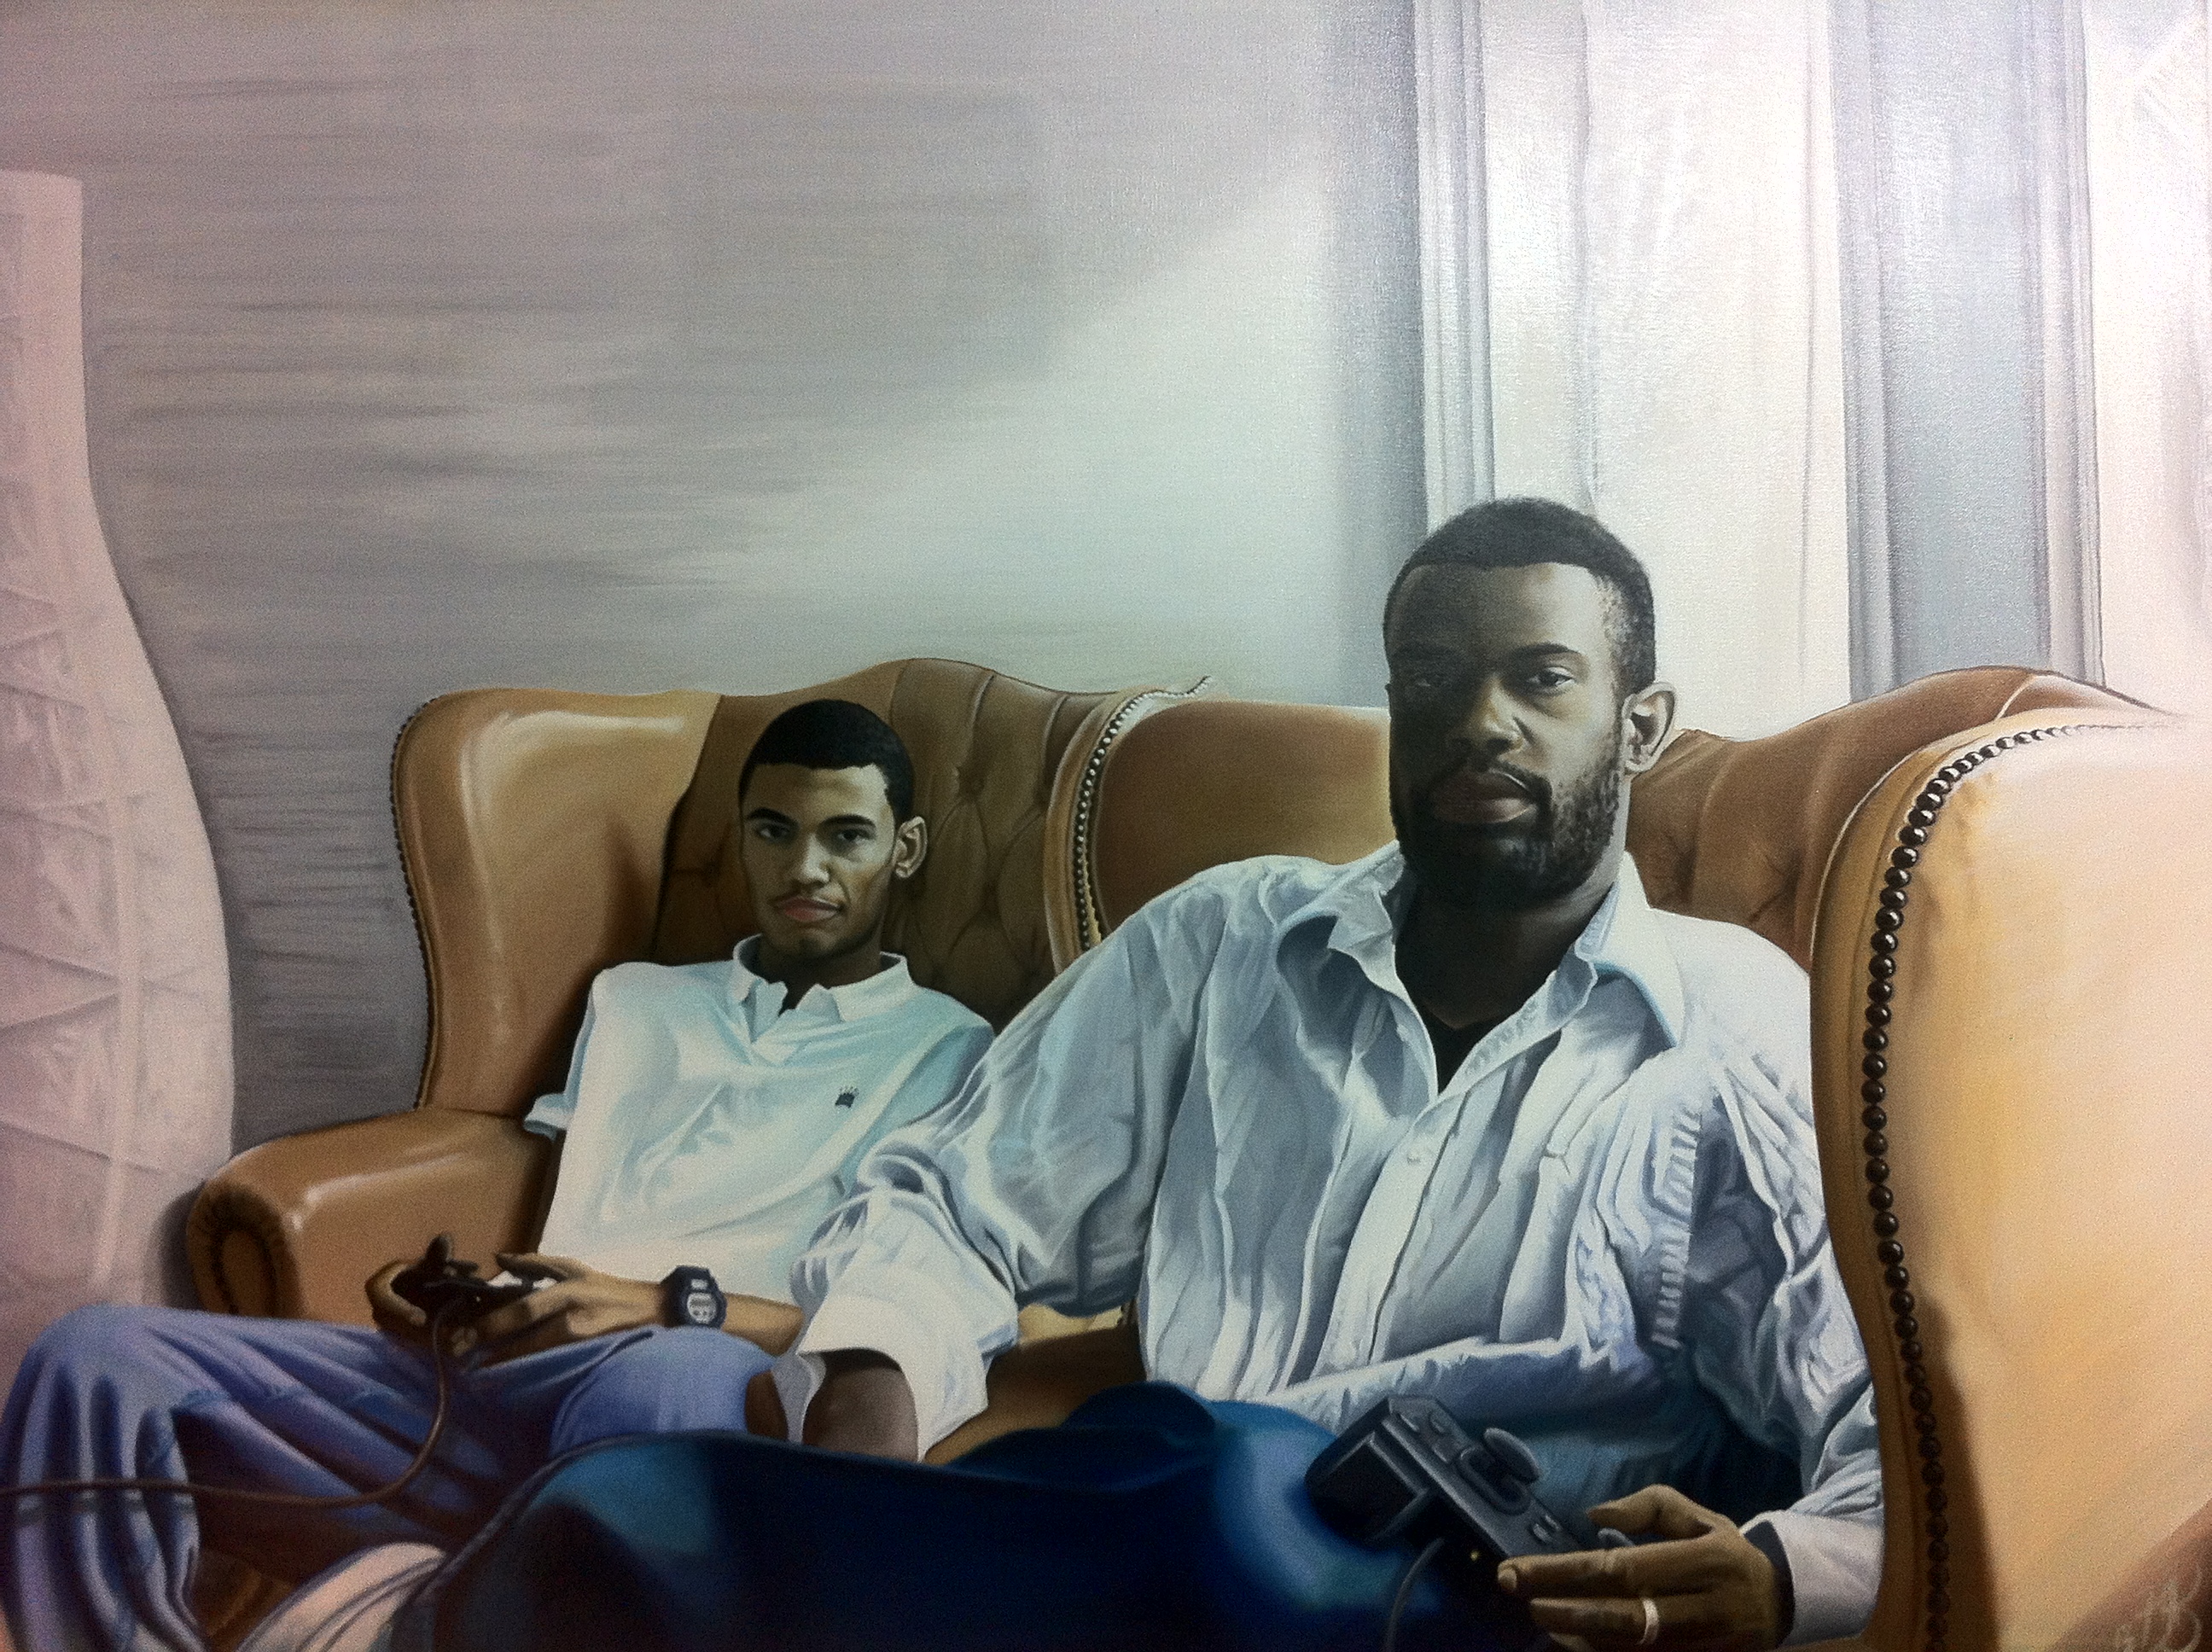 An oil portrait painting by Ben summers of a father and son